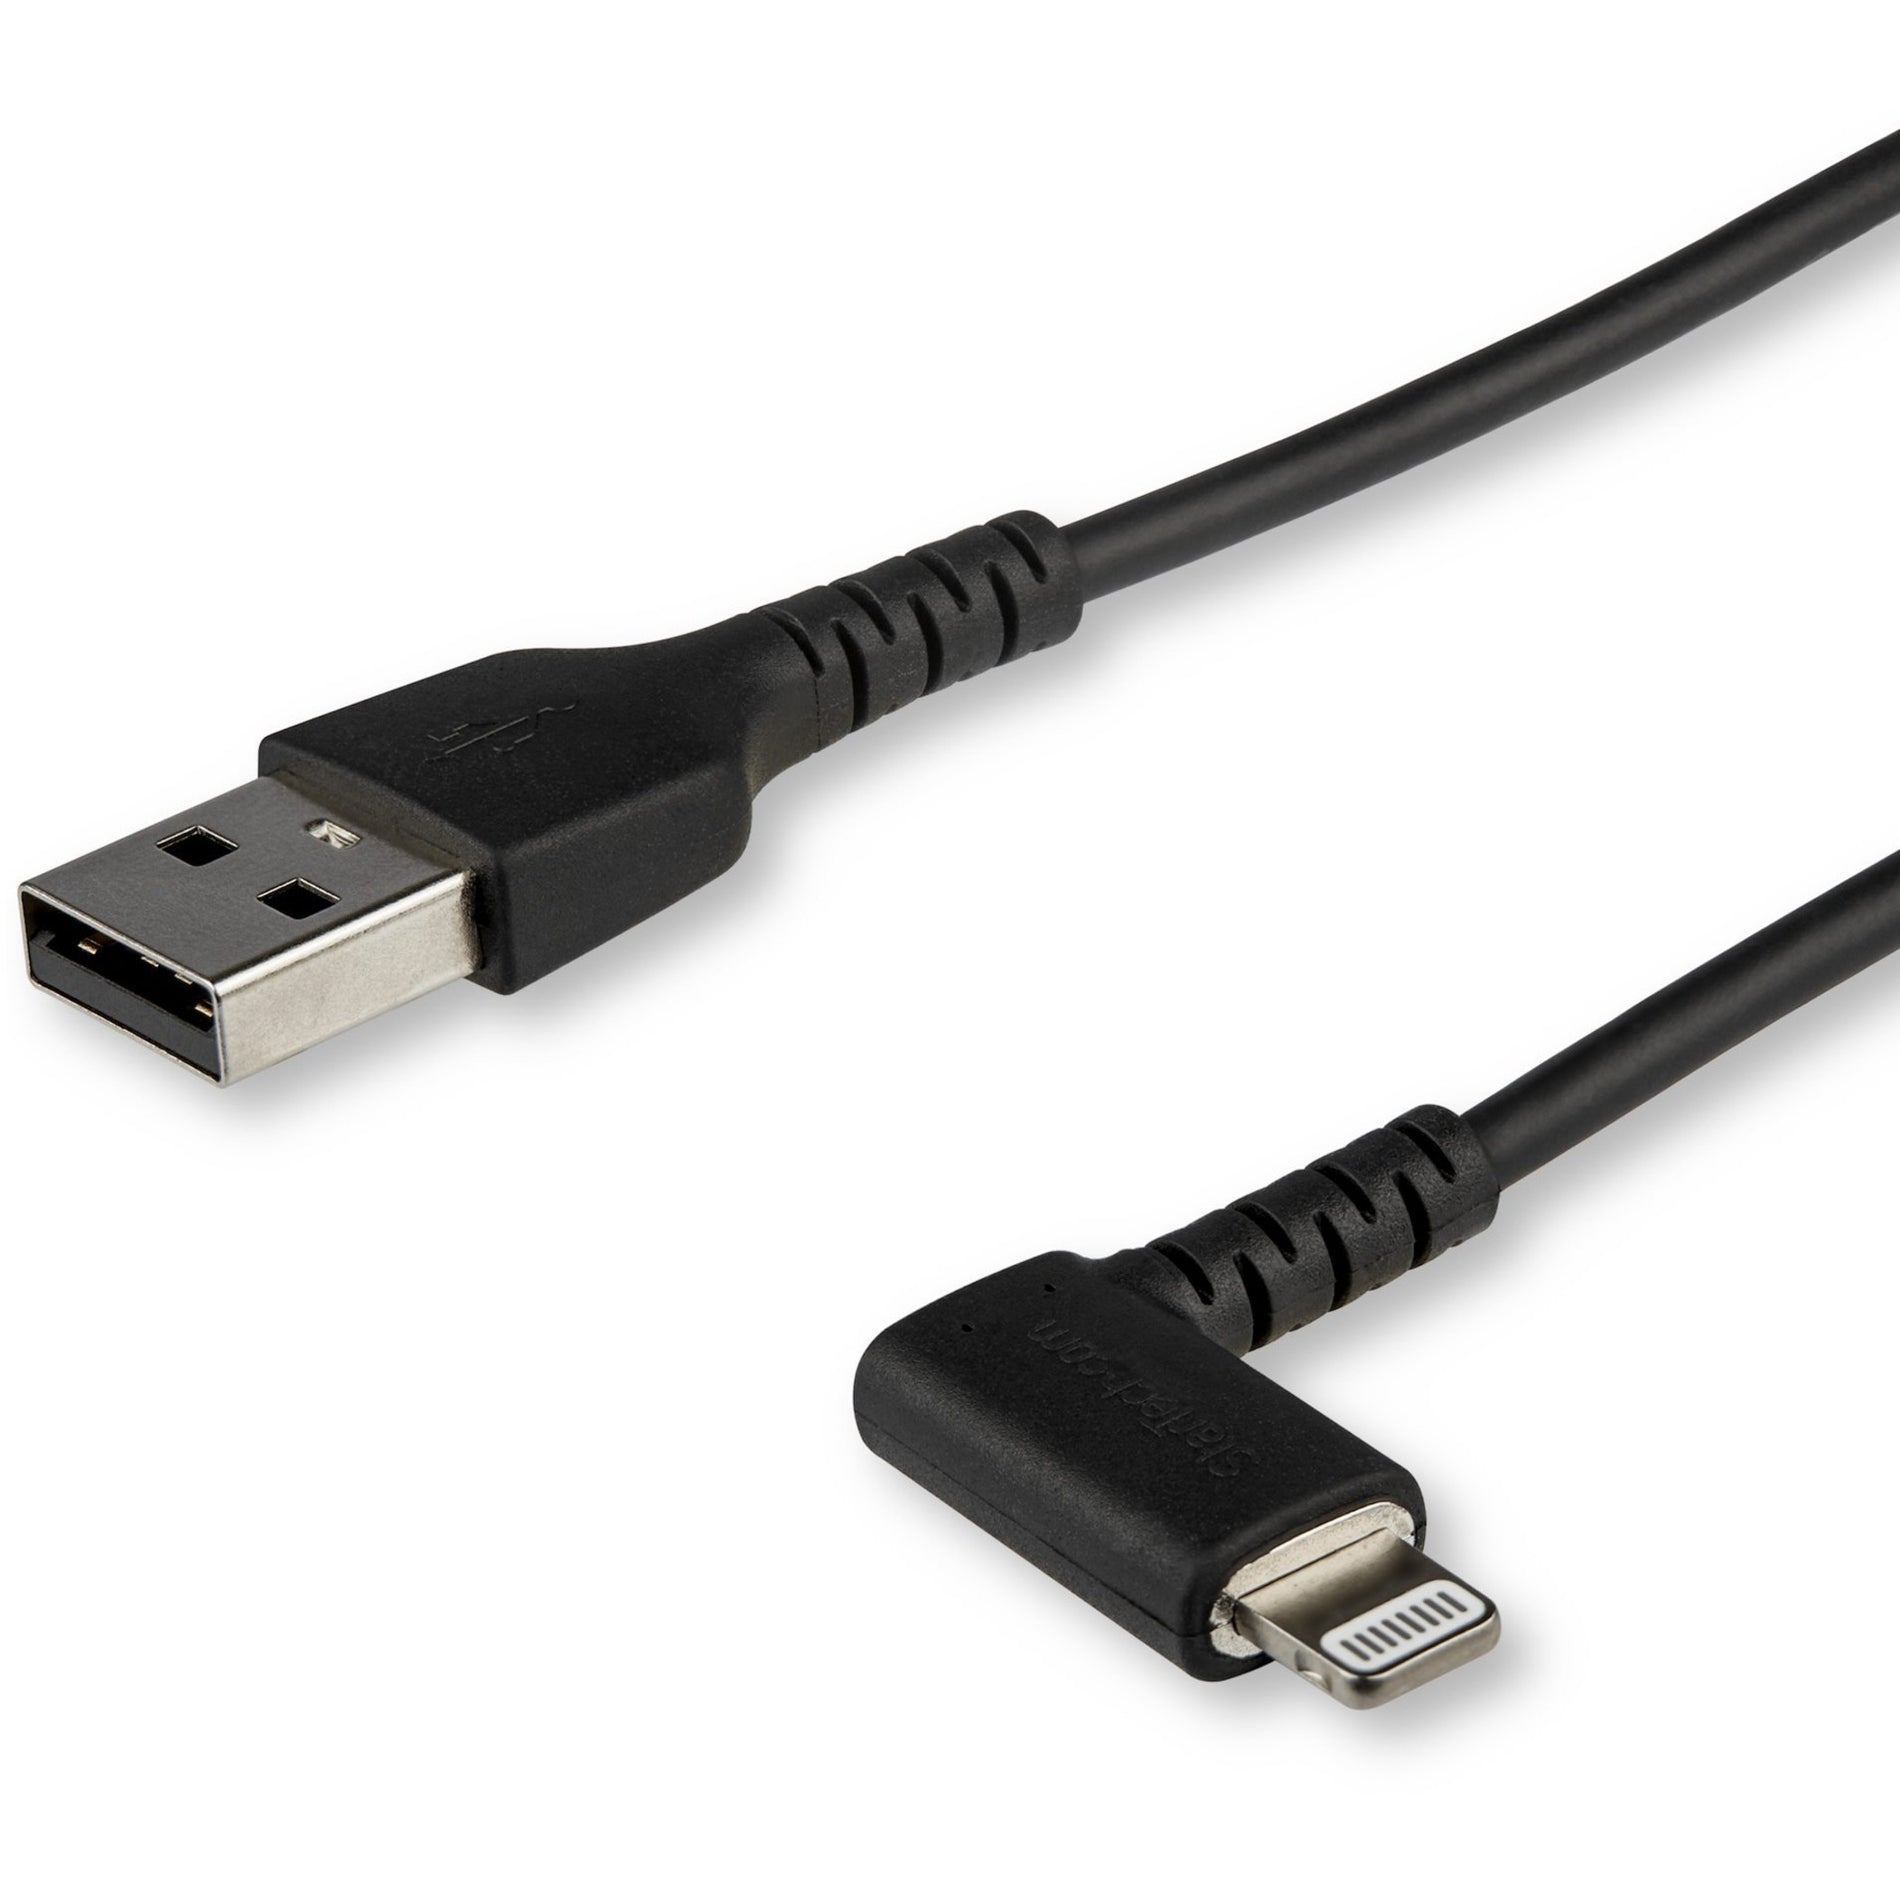 StarTech.com RUSBLTMM2MBR Lightning/USB Data Transfer Cable, 6.6Ft Heavy Duty Mfi Certified Cable, Black, USB to Lightning